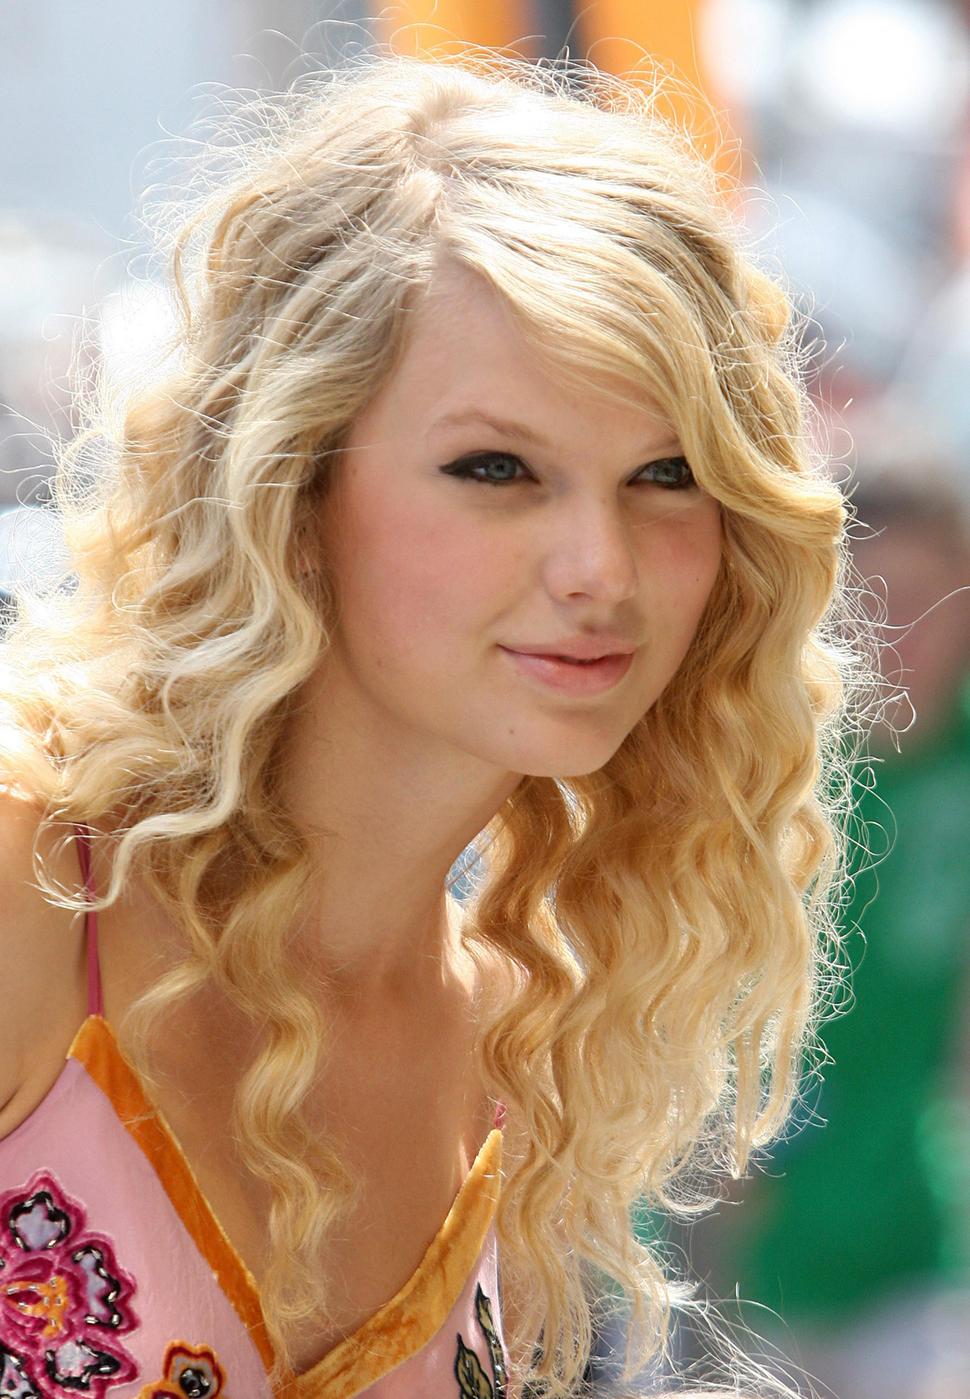 Taylor Swift Wallpaper Pictures  Wallpapers HD for Your 